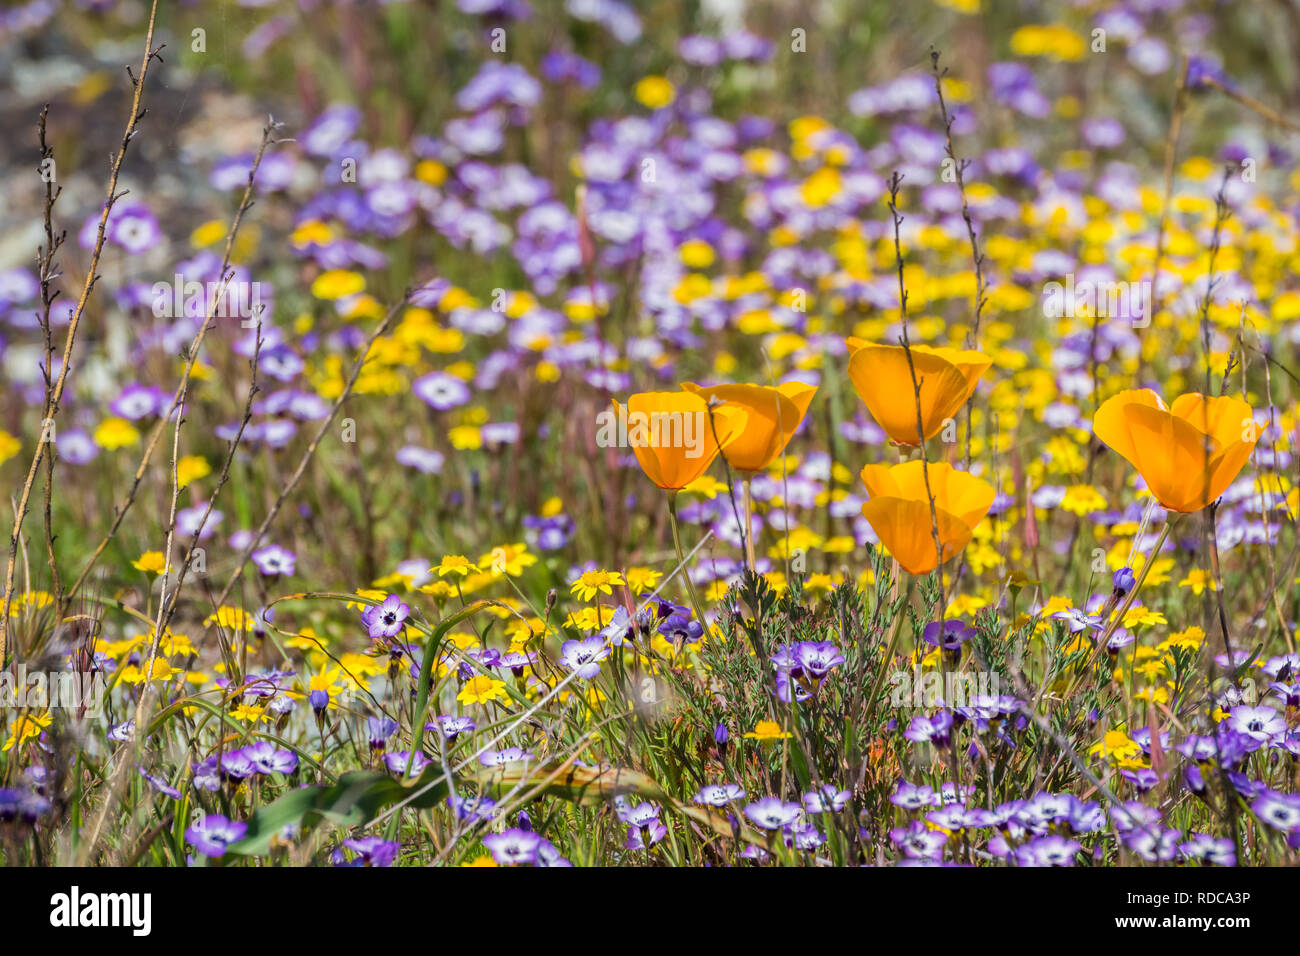 California poppies blooming on a meadow, Goldfields and Gilia in the background,California Stock Photo